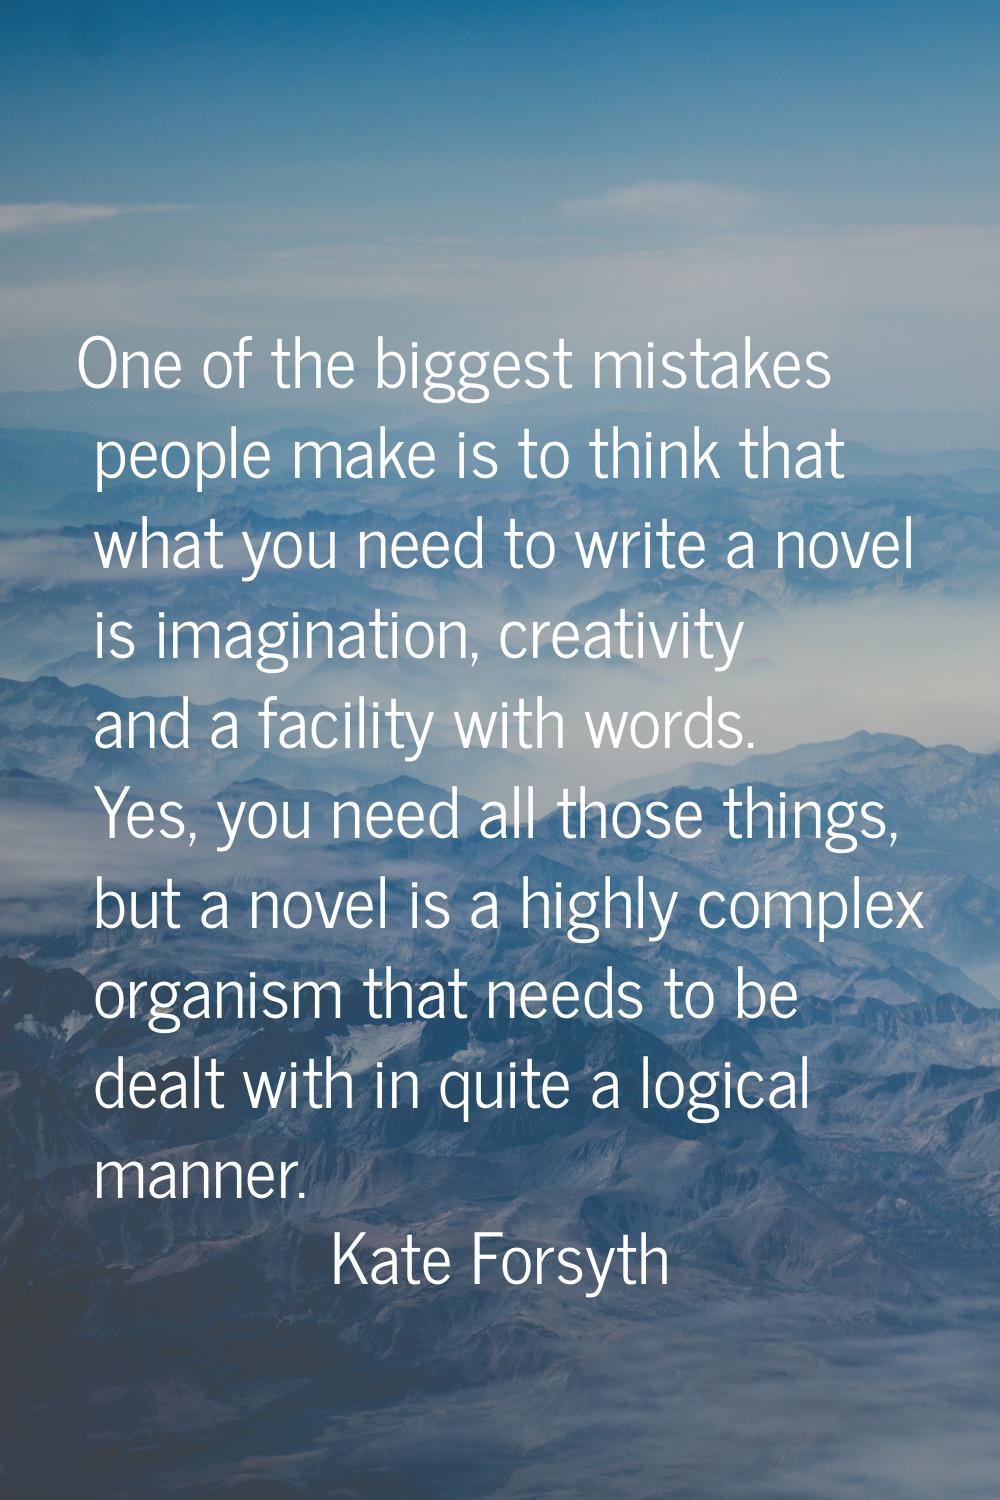 One of the biggest mistakes people make is to think that what you need to write a novel is imaginat